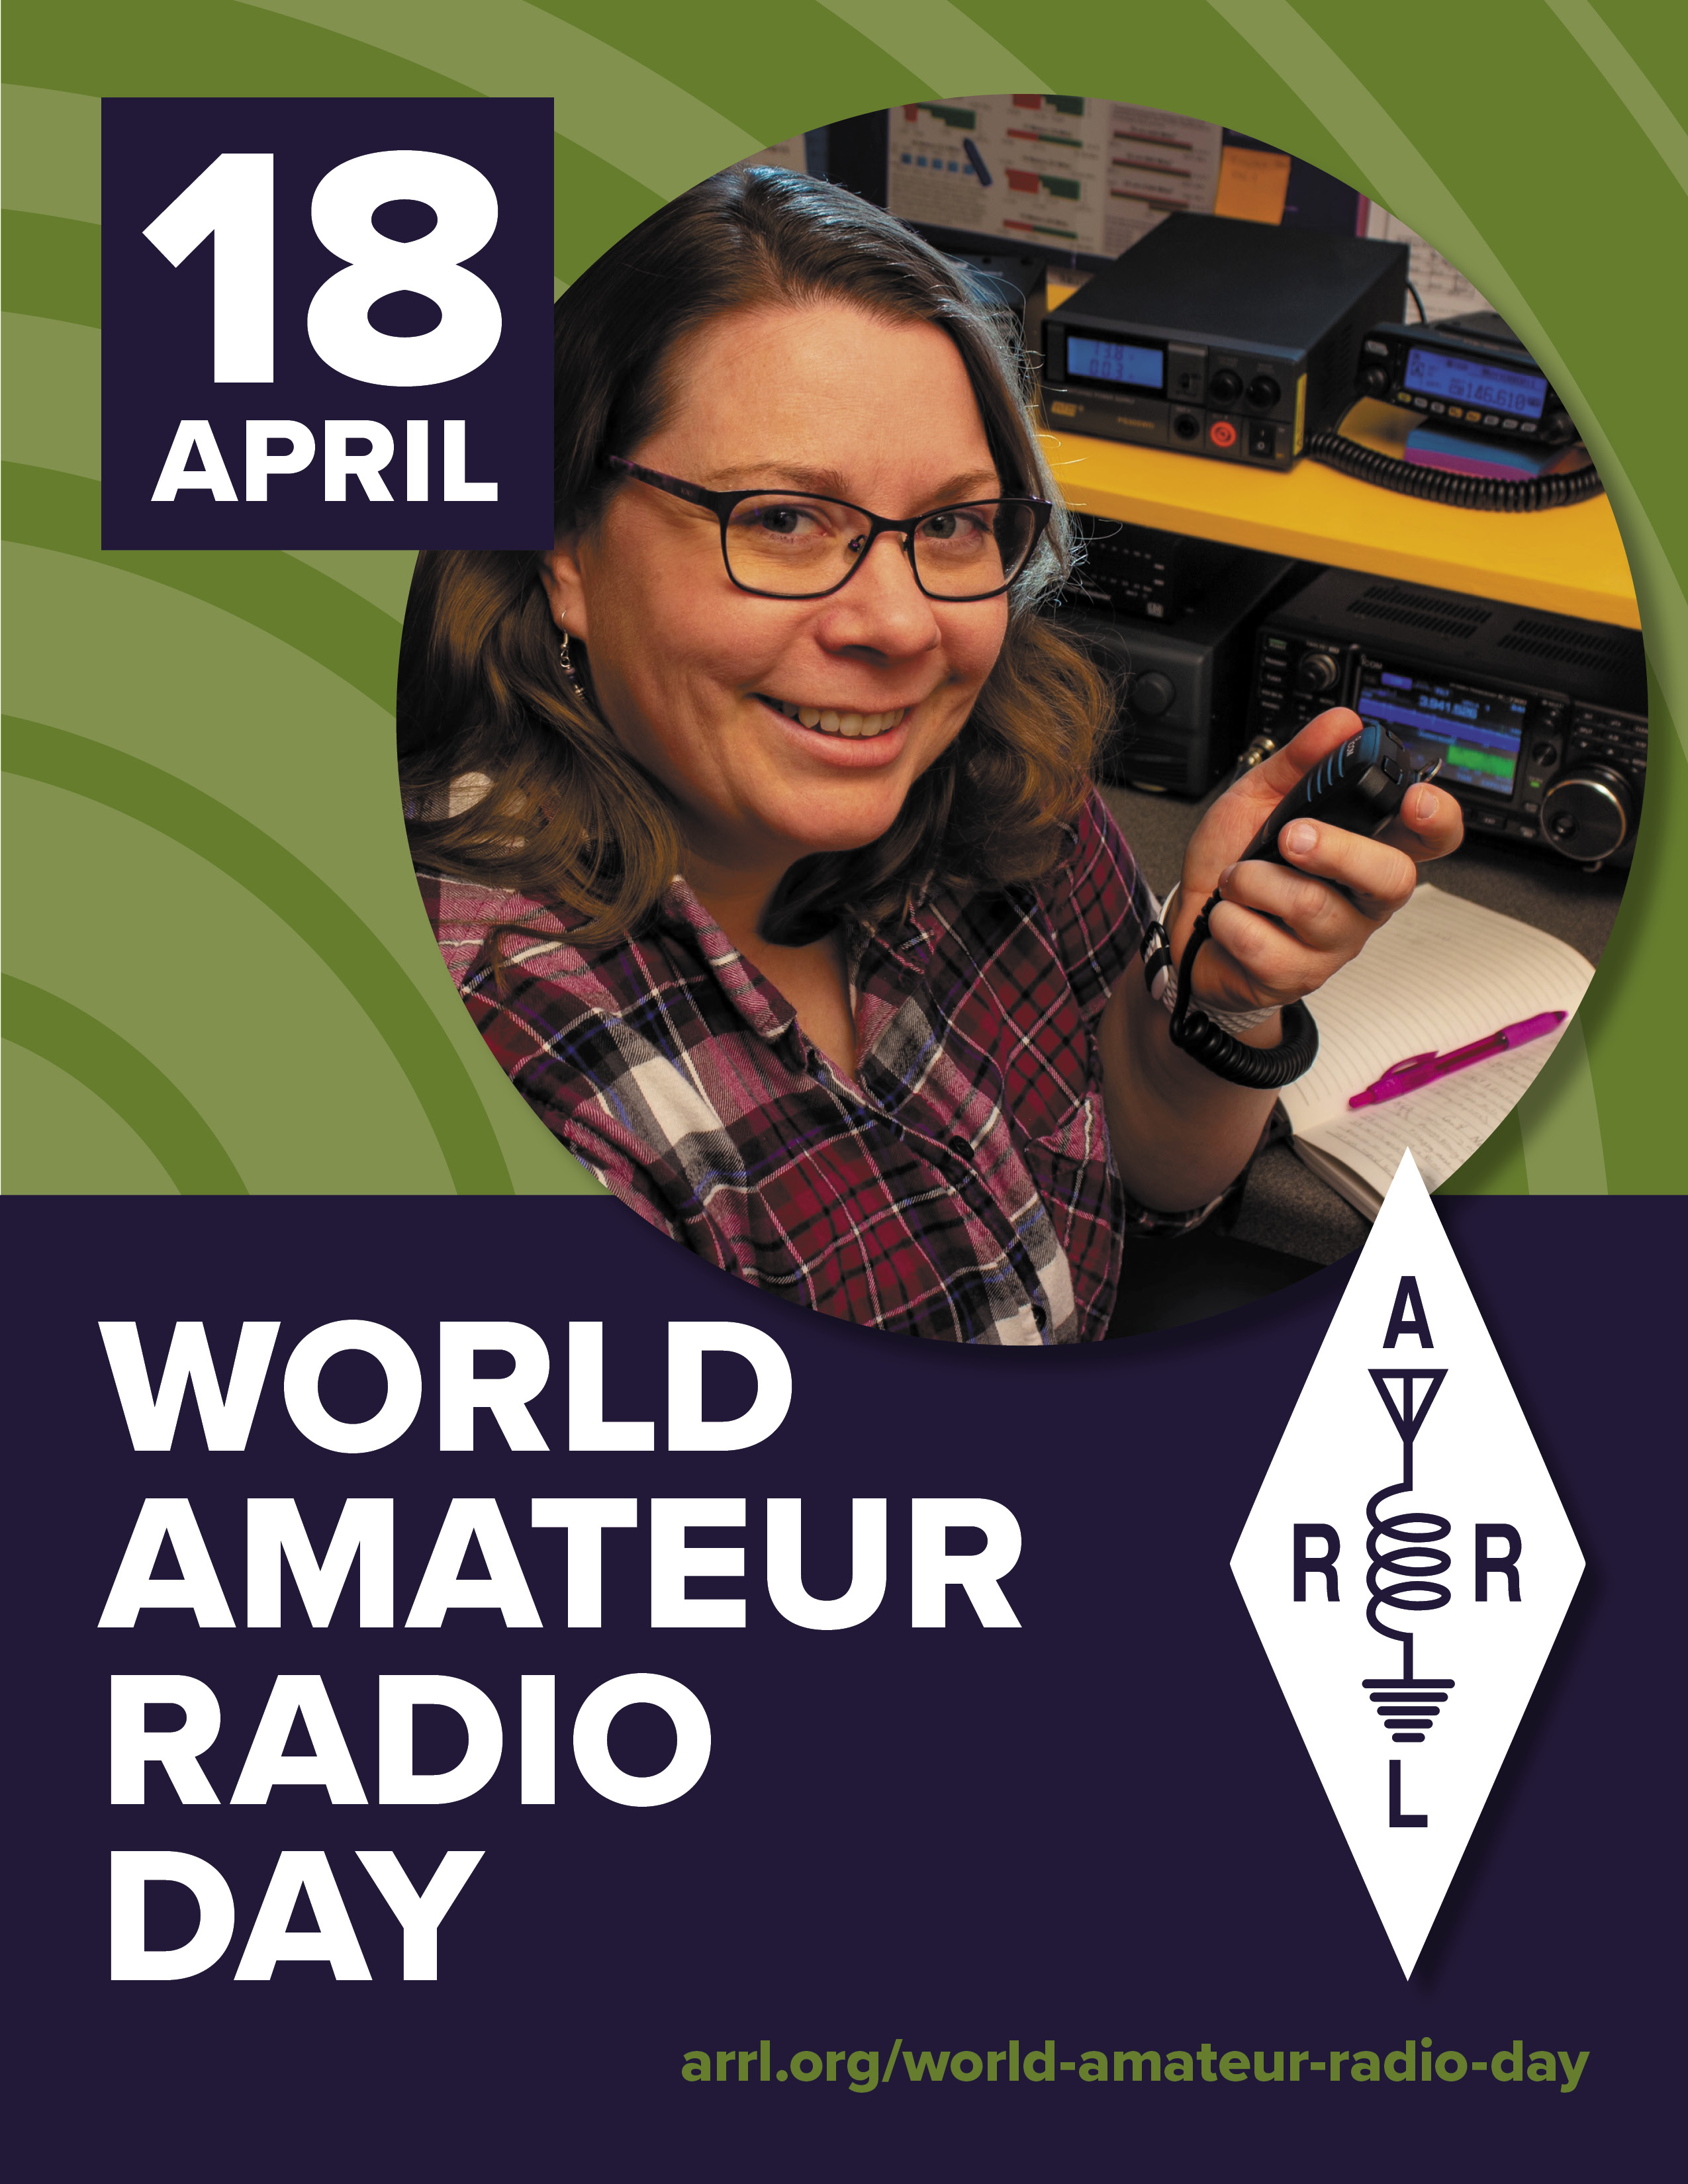 Spread the word! 2021 World Amateur Radio Day is April 18